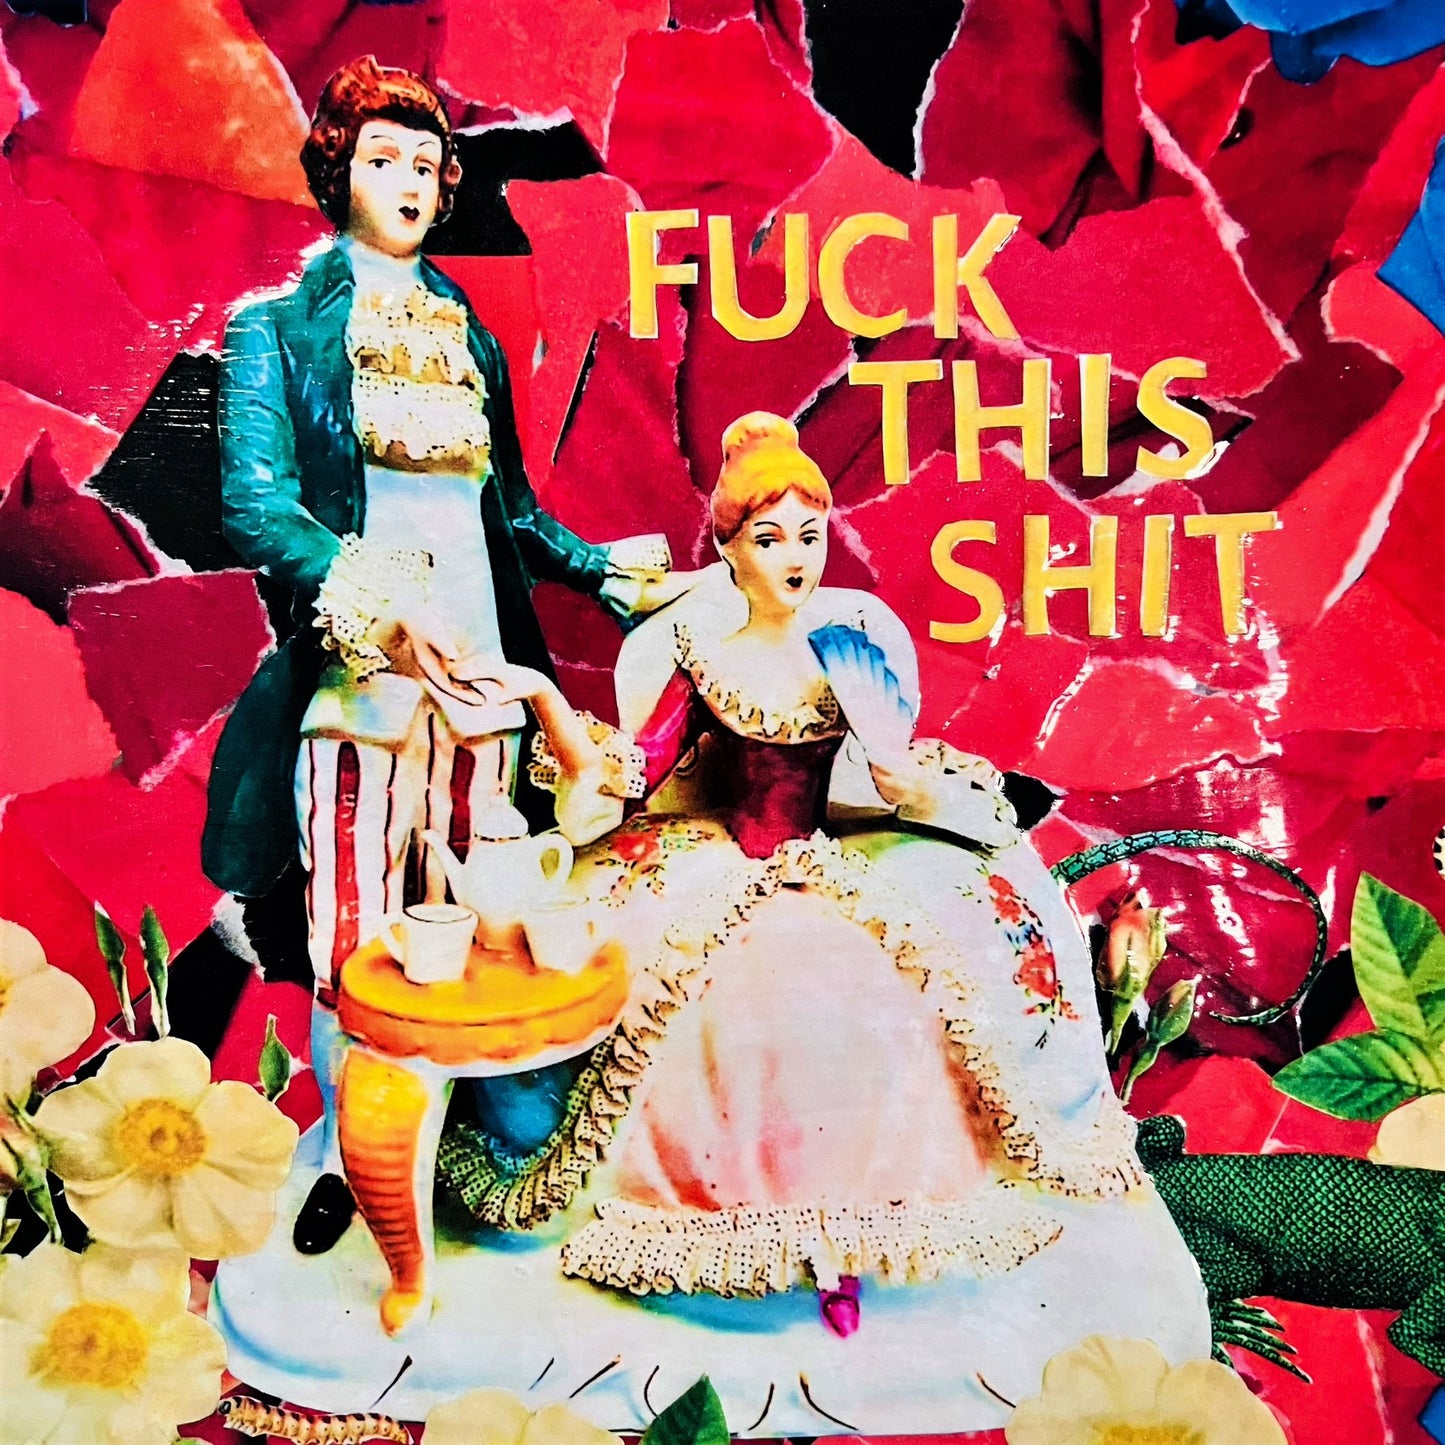 Red Upcycled Wall Plate - "Fuck This Shit" - by House of Frisson